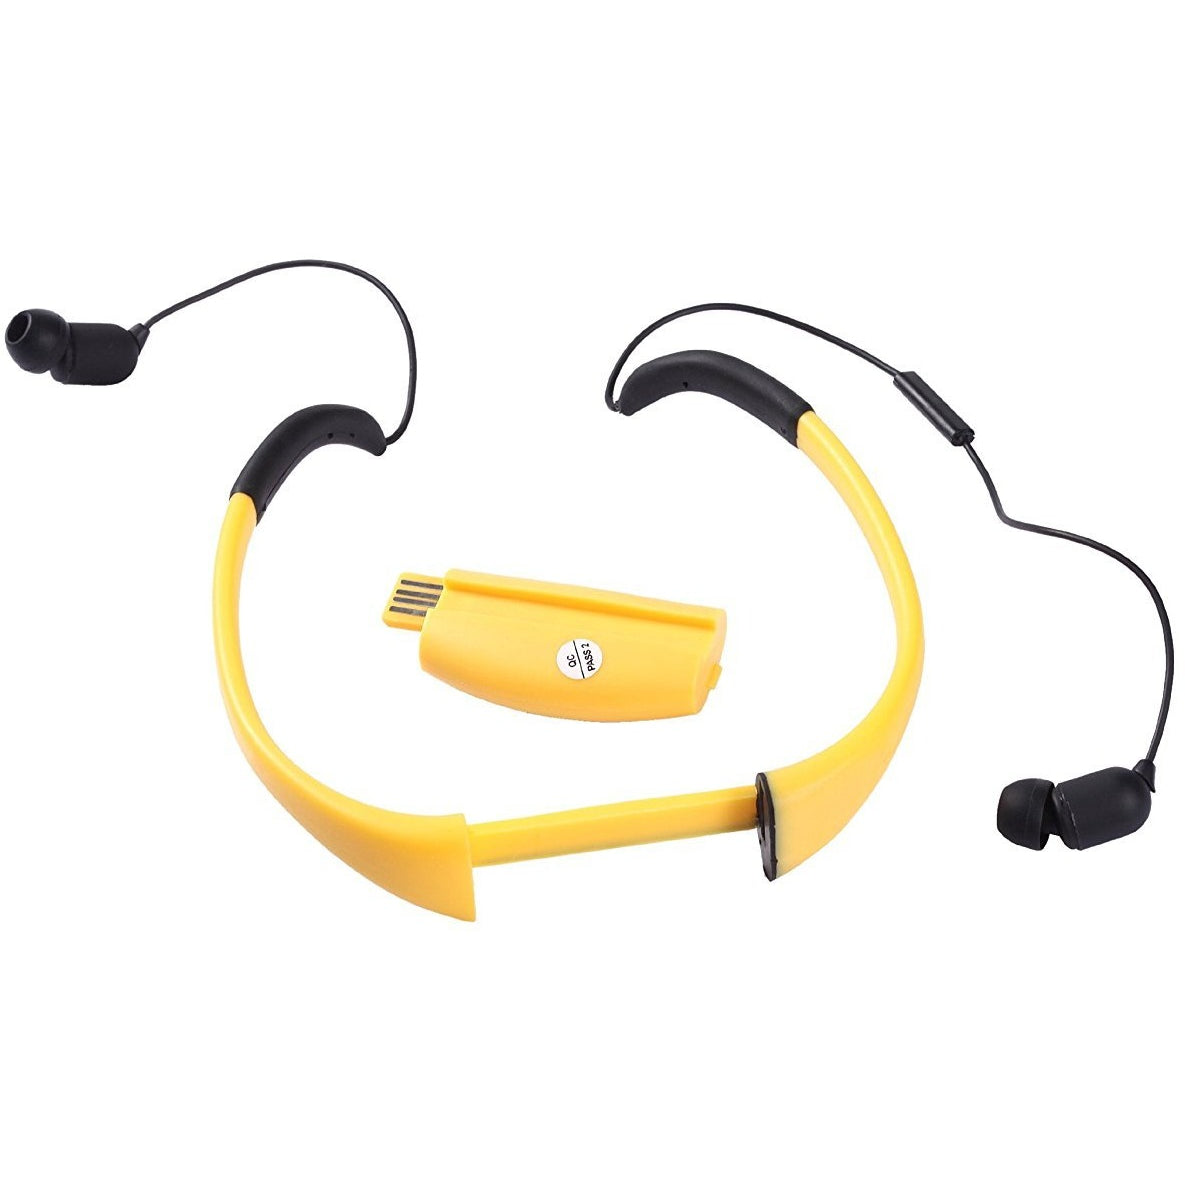 Tayogo Upgraded Waterproof Mp3 Player with Bluetooth FM Headset - waterpoof mp3 player;swimming headphone;bone conduction headphone;bone conduction bluetooth;tayogo